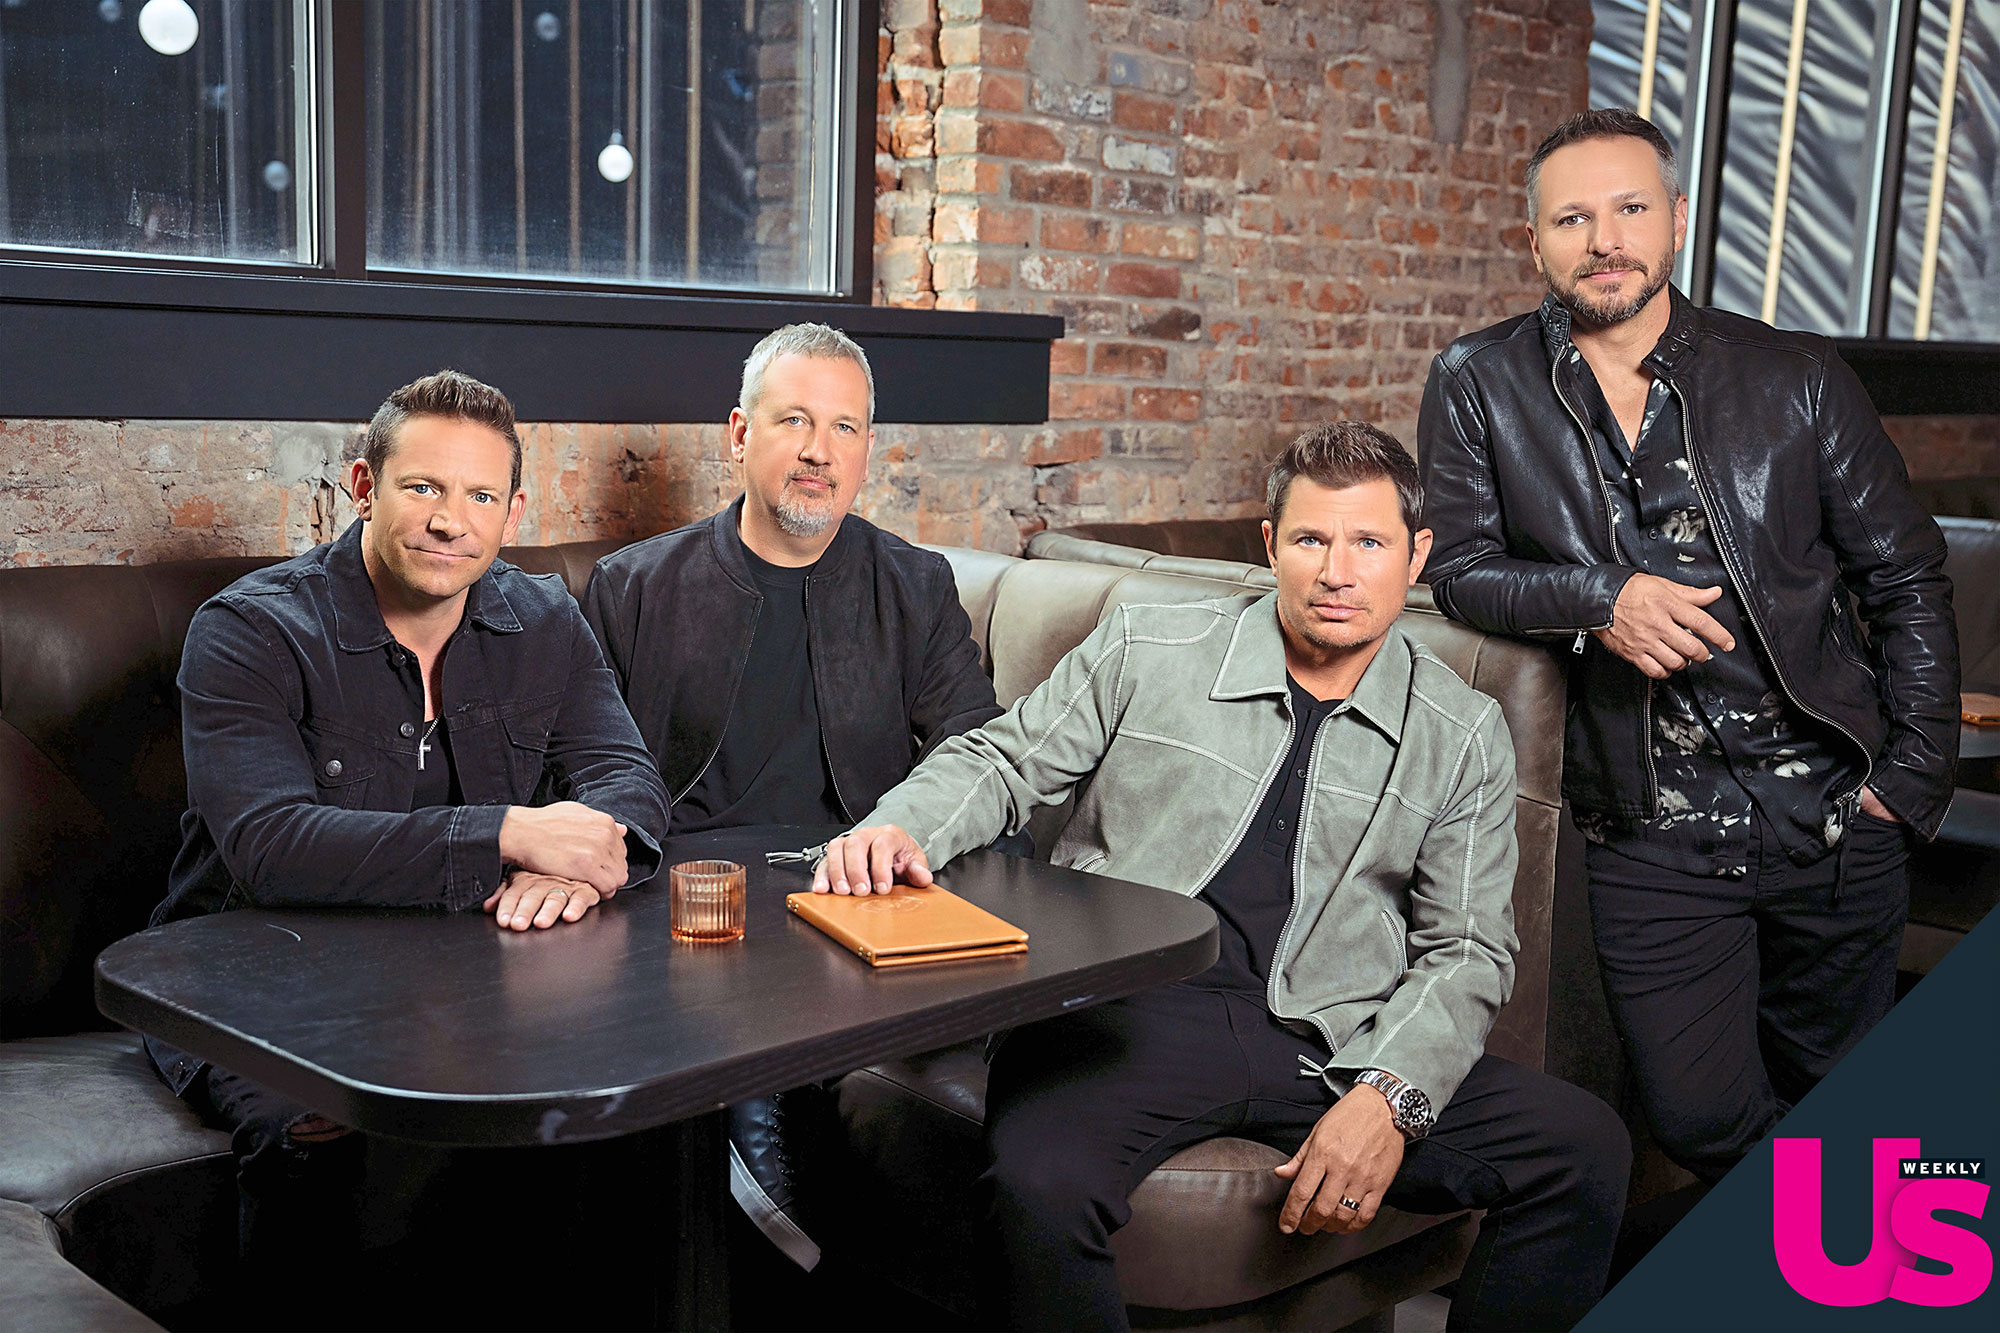 98 Degrees reveal their list of rejected band names